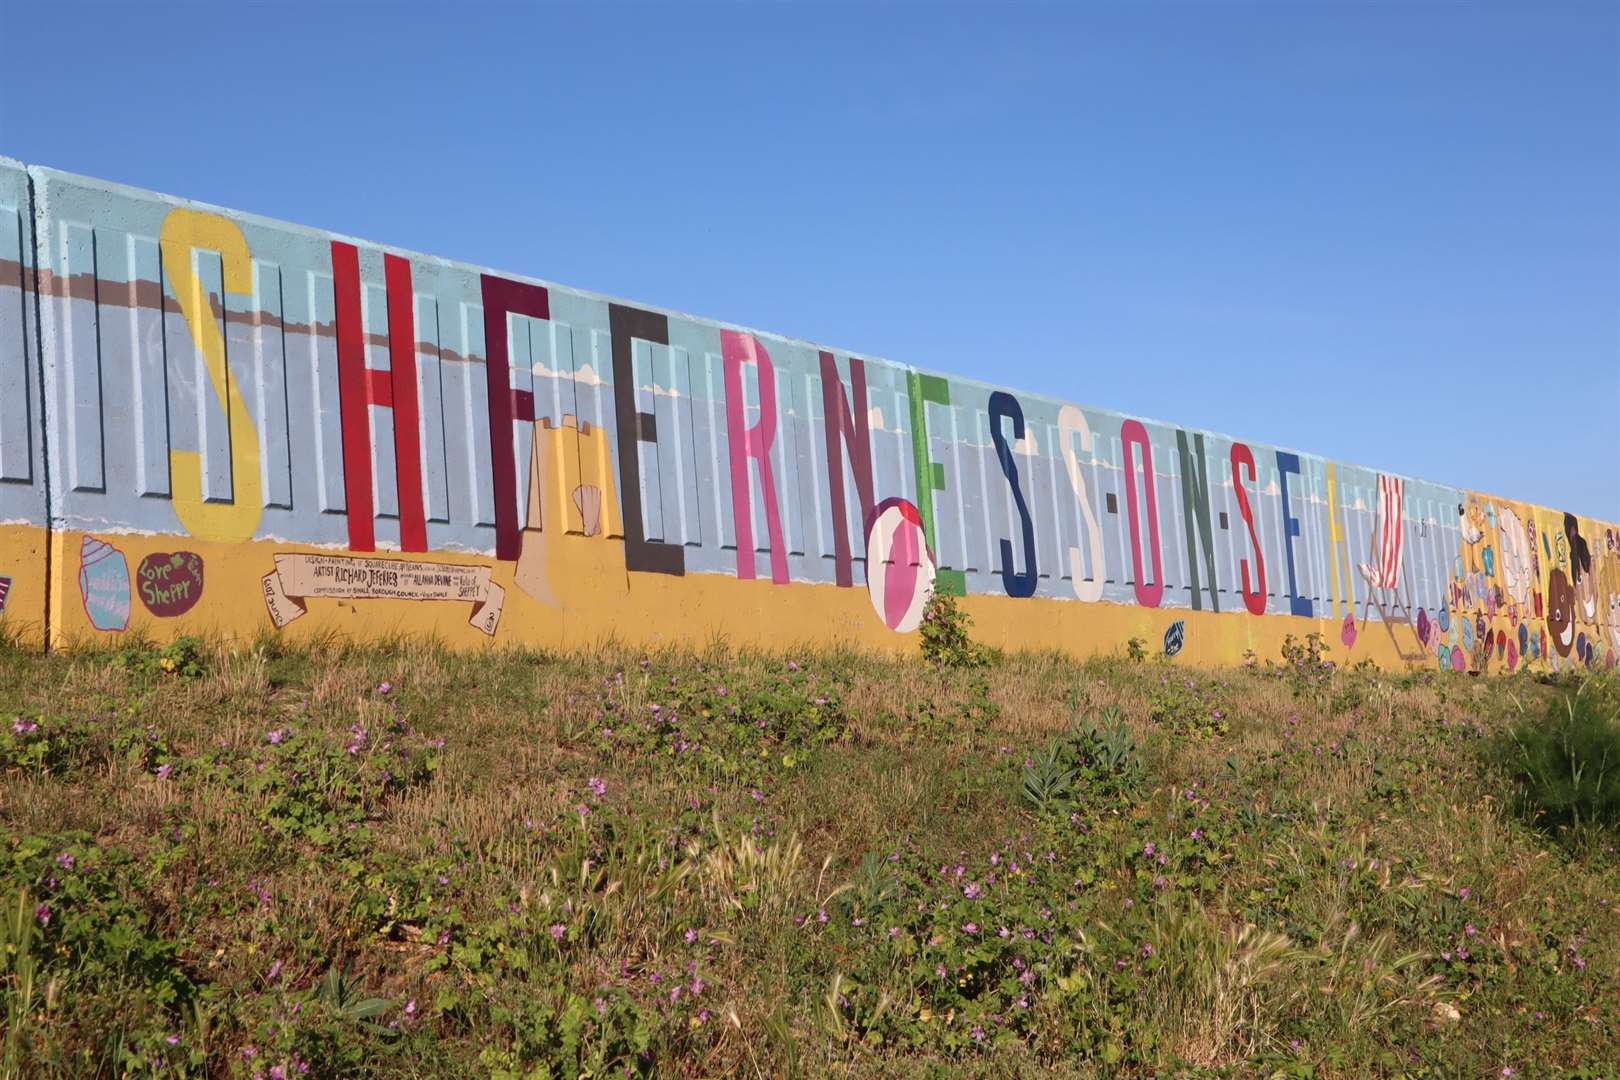 Sheerness-on-Sea mural by Richard Jeferies on the sea all at Beachfields